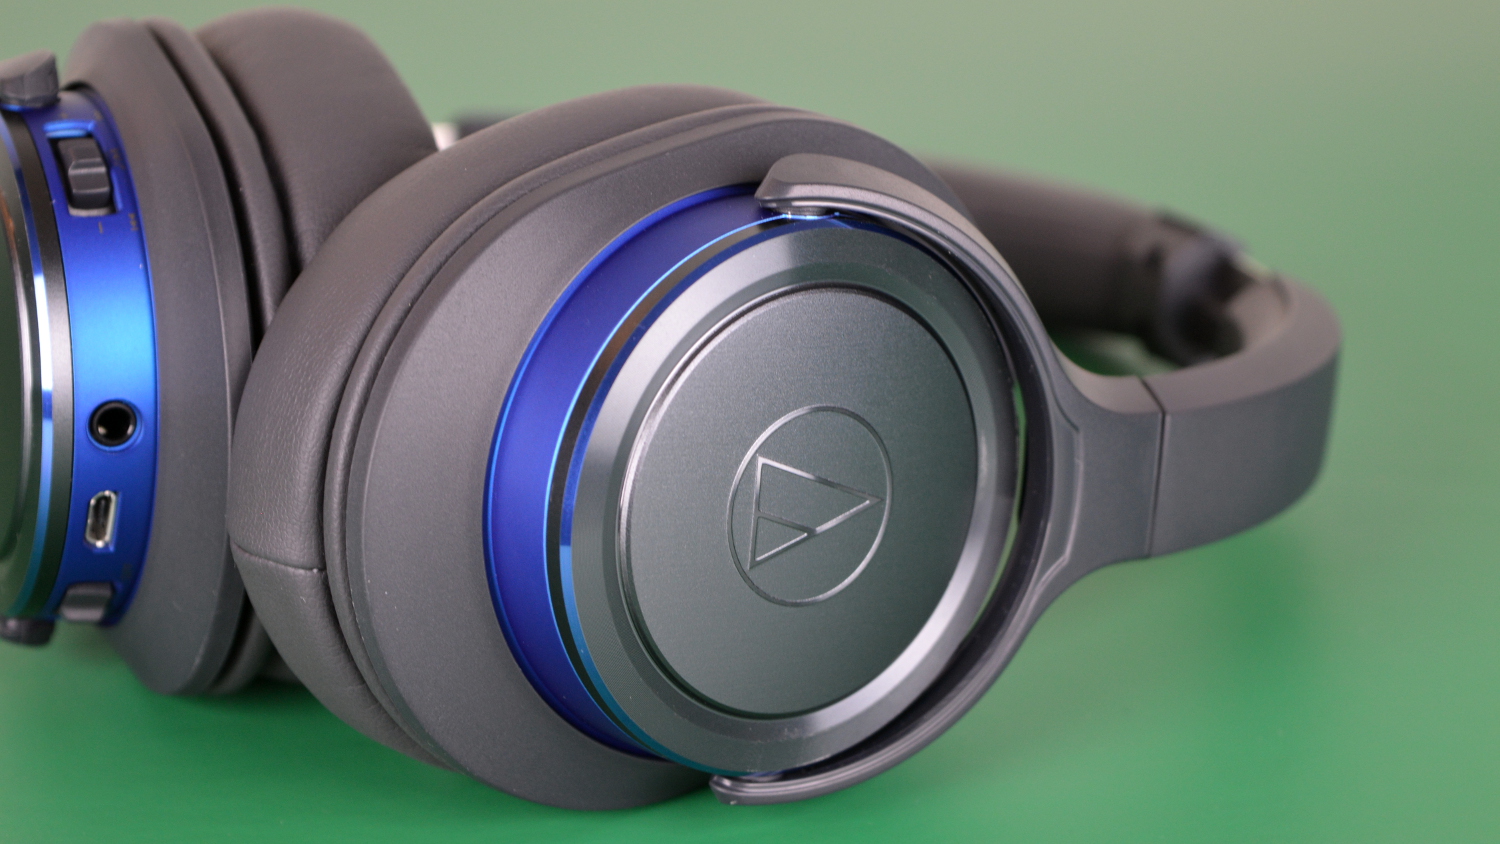 Audio Technica ATH-WS660BT Solid Bass Headphones Review 